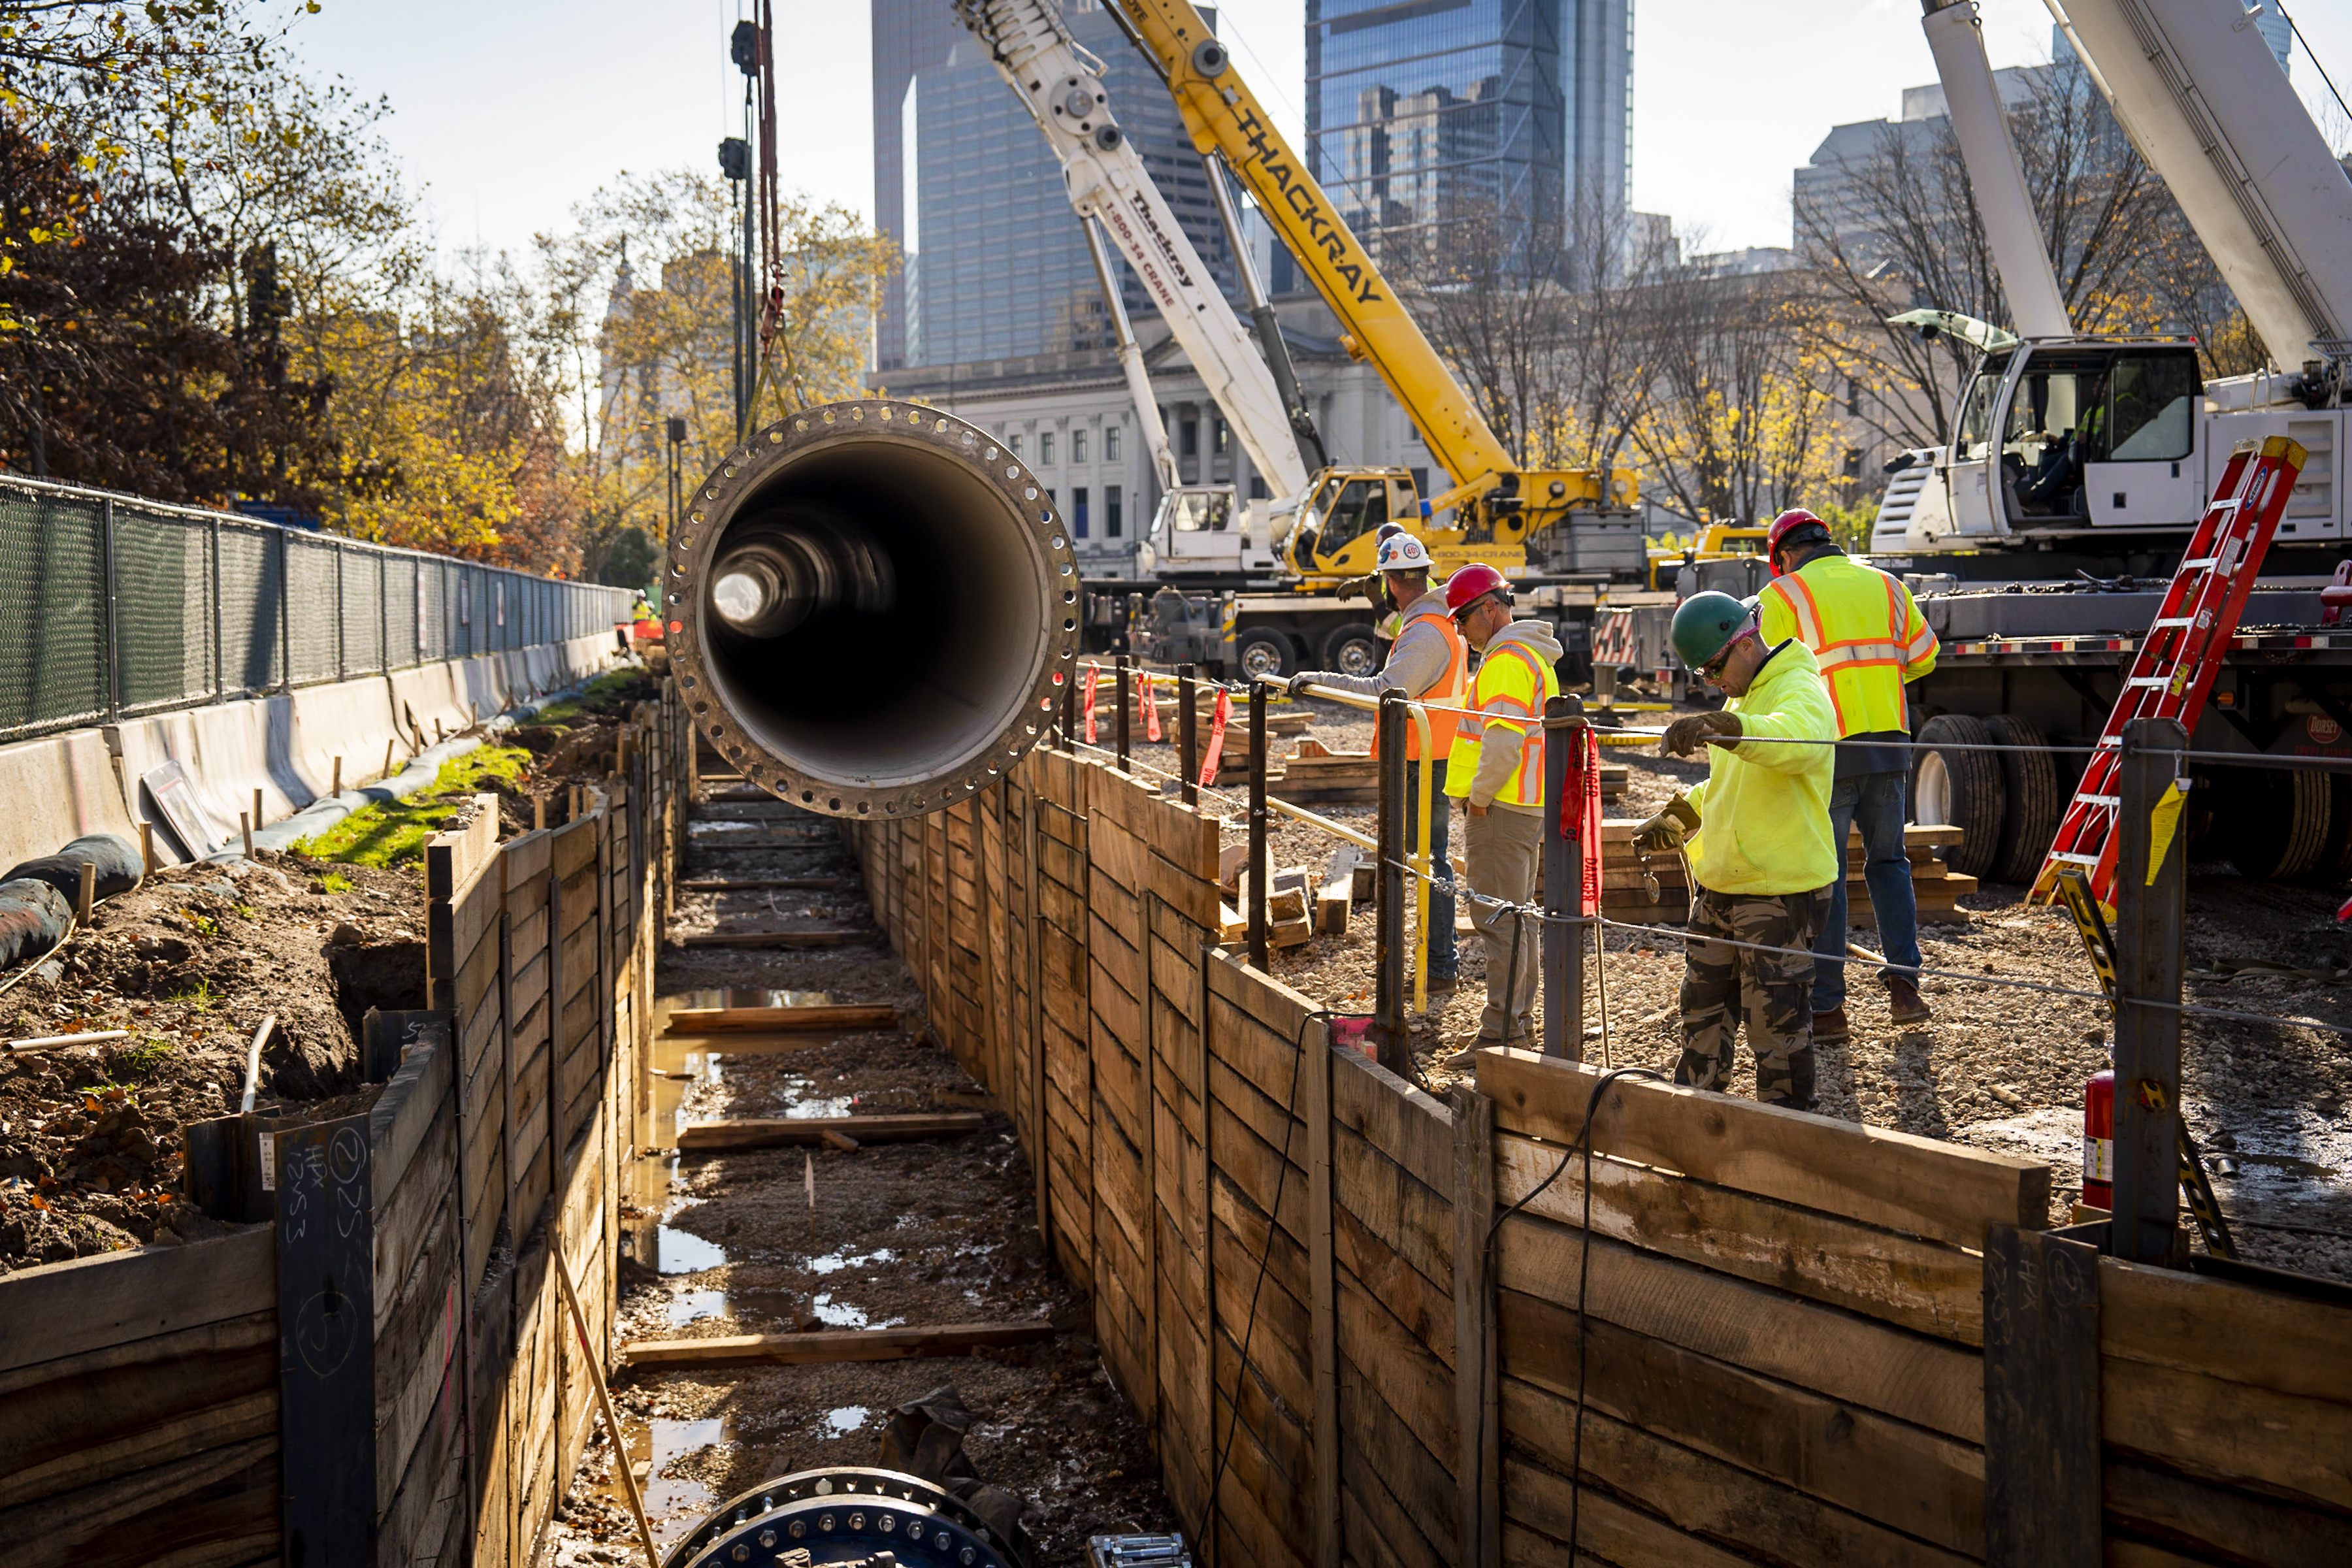 A section of new water main is lowered into a trench stabilized with wood plank walls holding up the sides. We're looking down the length of the trench and into one end of the pipe, which has a raised ring on the end, with holes for bolting it onto the next section all the way around it. Two crane arms are visible in the top right corner, and behind them we see a bit of the Franklin Institute, One and Three Logan Square, and other buildings in the background. Trees with fall foliage line the left side, behind the construction fencing.